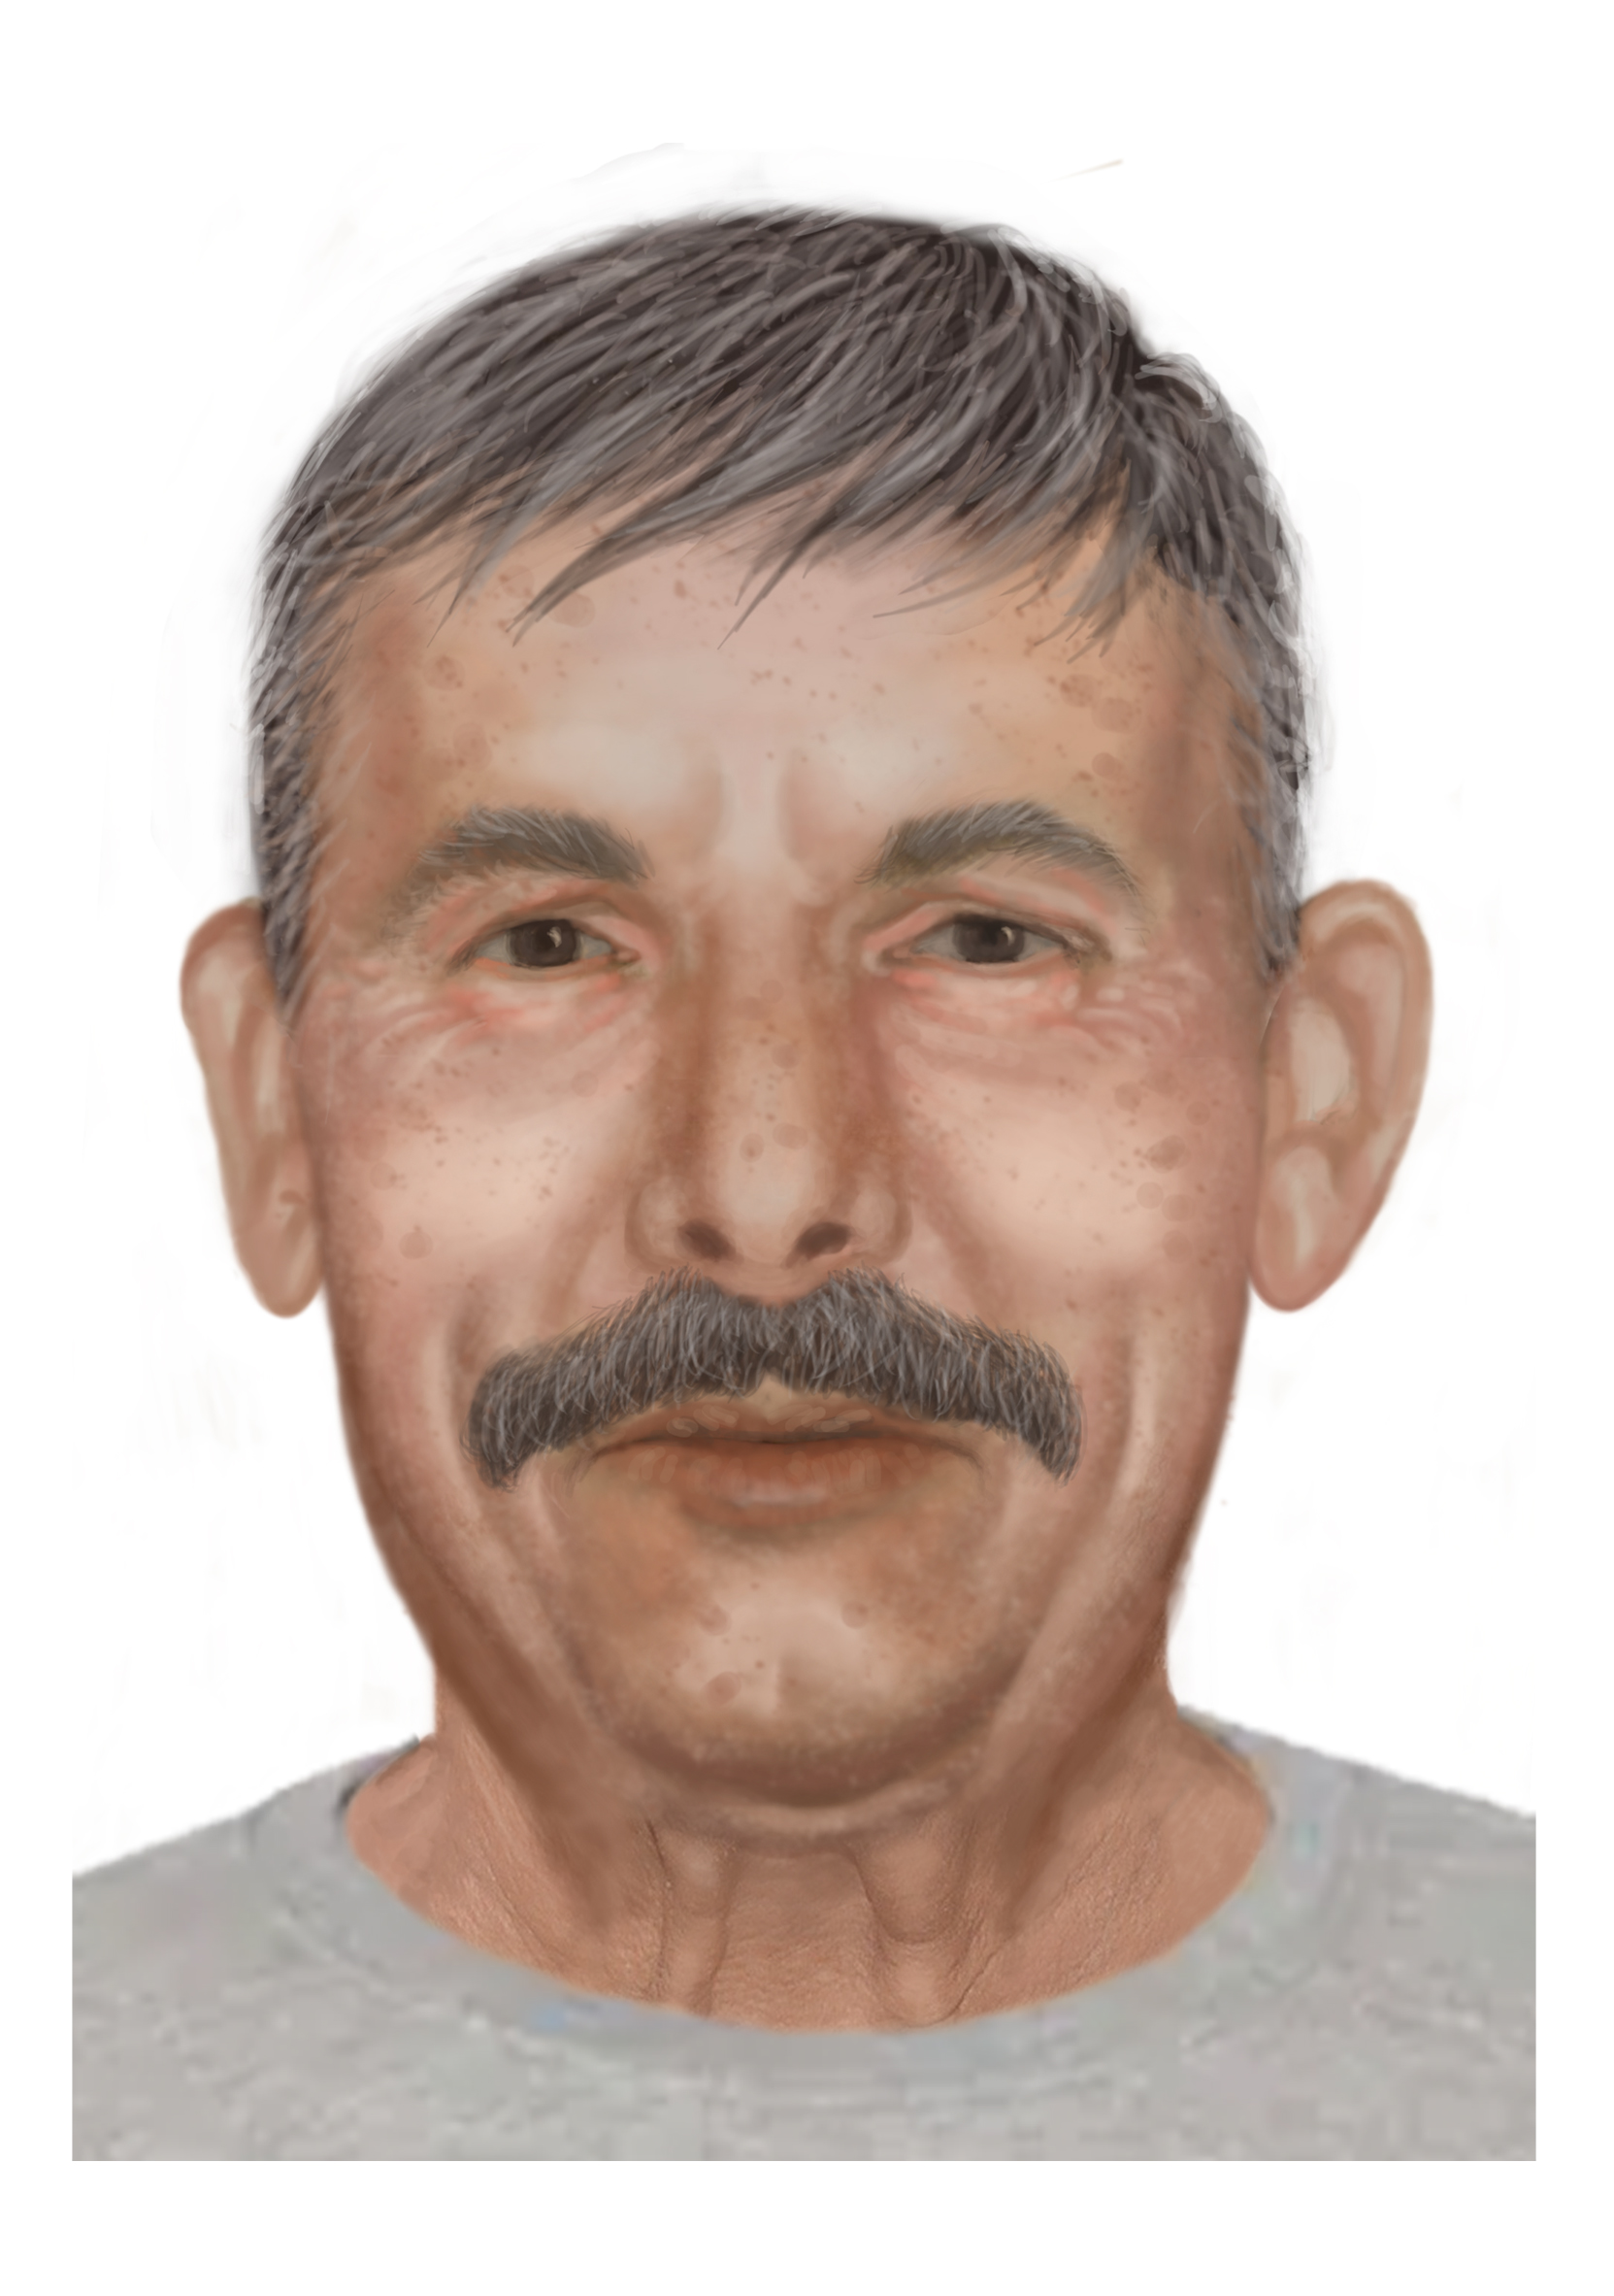 A rendering of what homicide suspect David Liggett would look like today